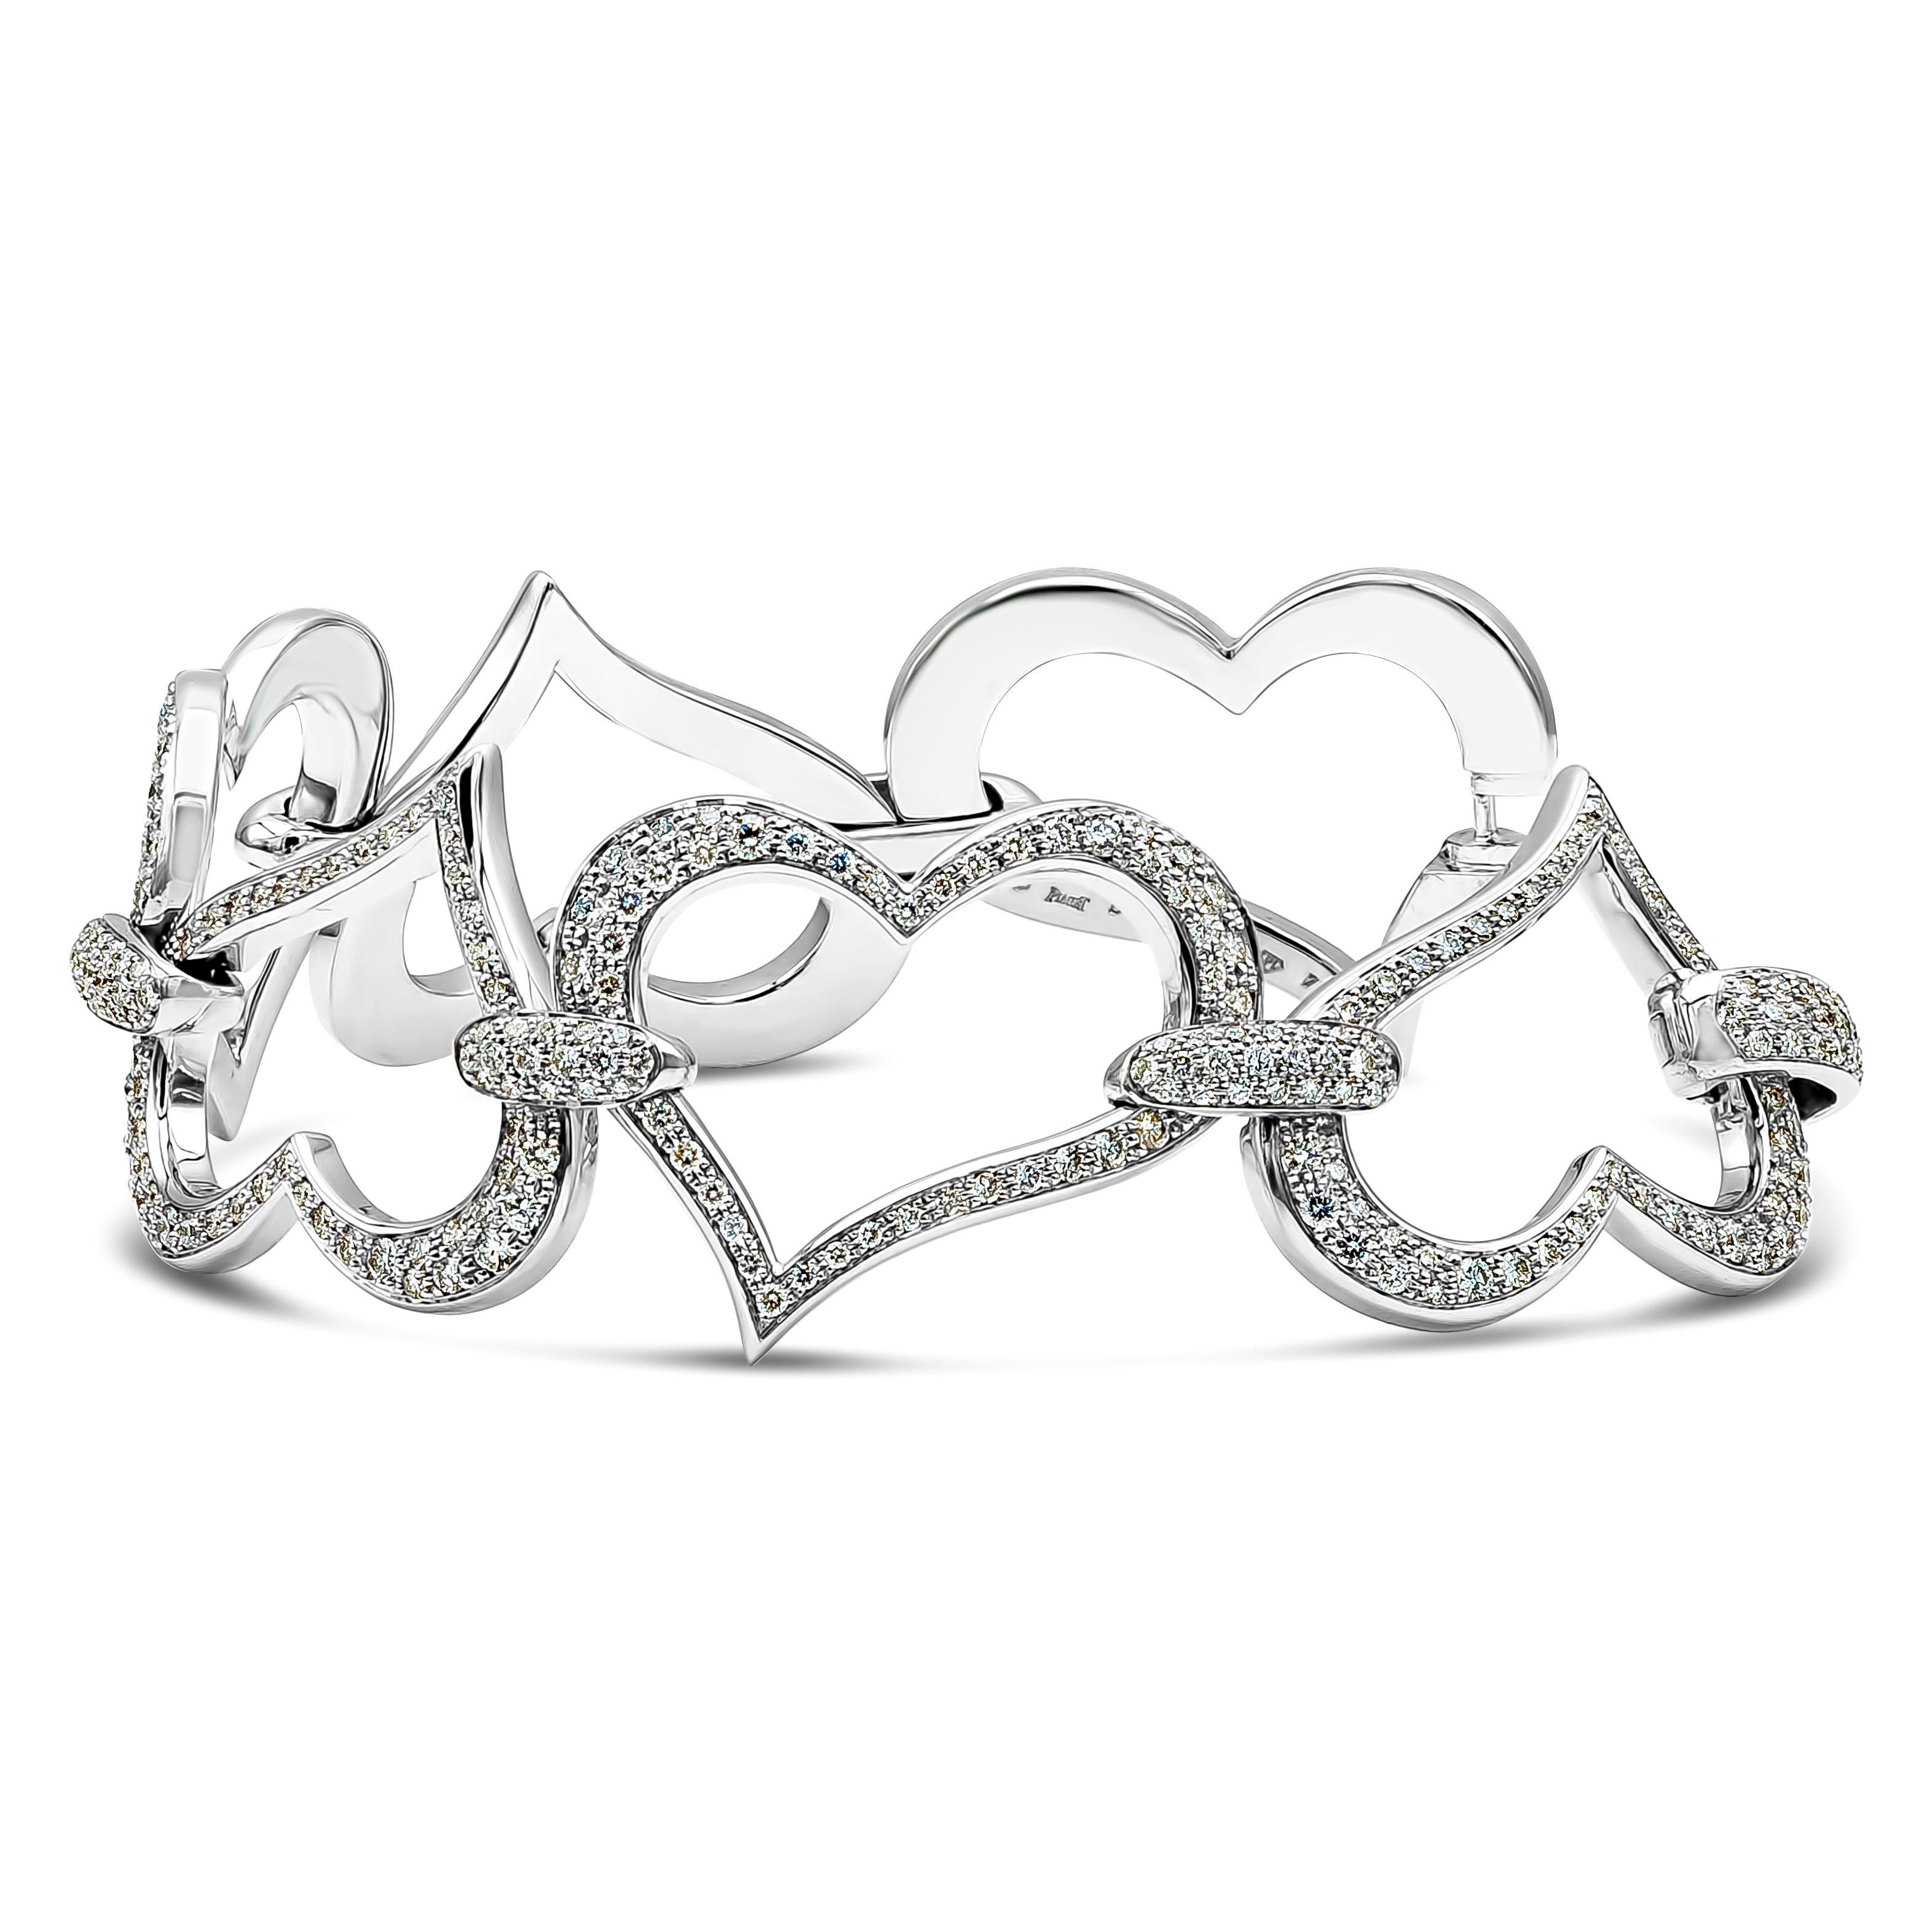 A large vogue-ish heart link bracelet, featuring 4.70 carats of round diamonds with D-E-F color and VVS clarity. The heart links are approximately 1 inch wide and made of 18K white gold. Gorgeously made and signed by Piaget. Available with matching